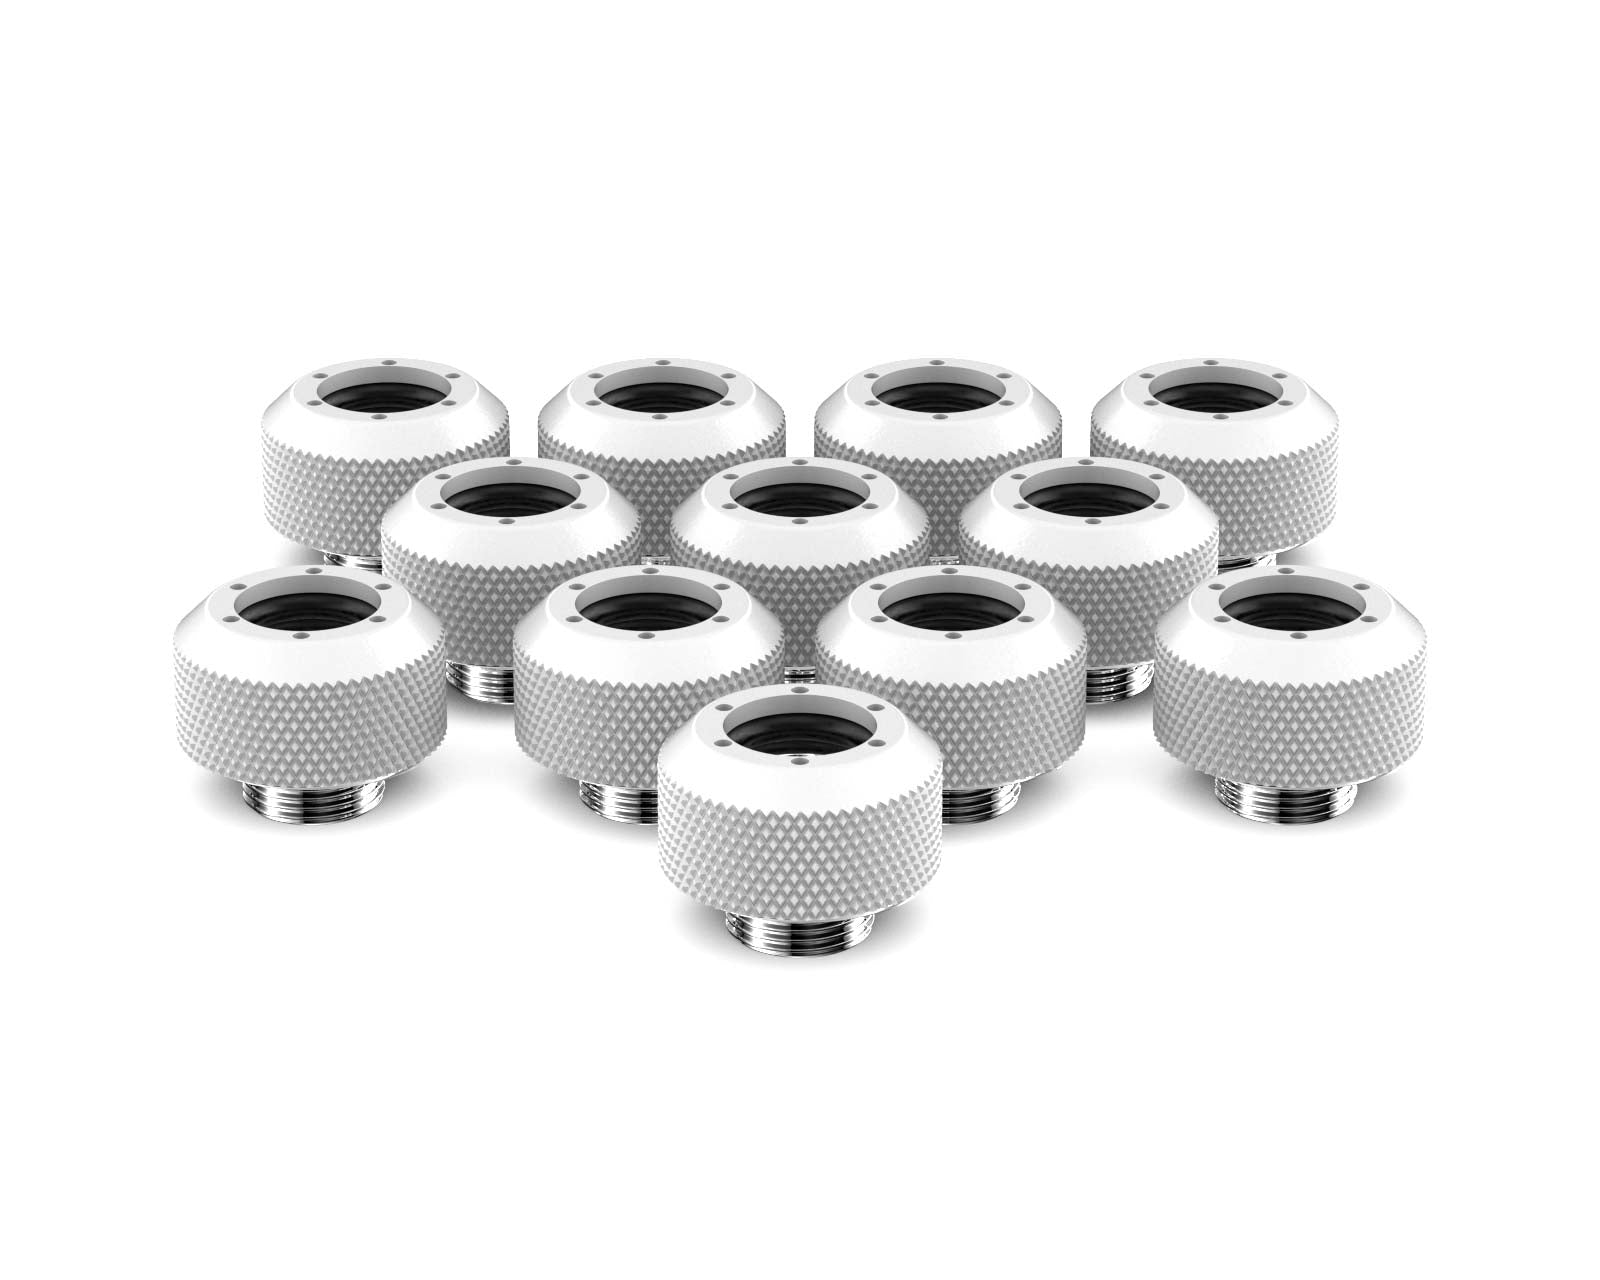 PrimoChill 1/2in. Rigid RevolverSX Series Fitting - 12 pack - PrimoChill - KEEPING IT COOL Sky White